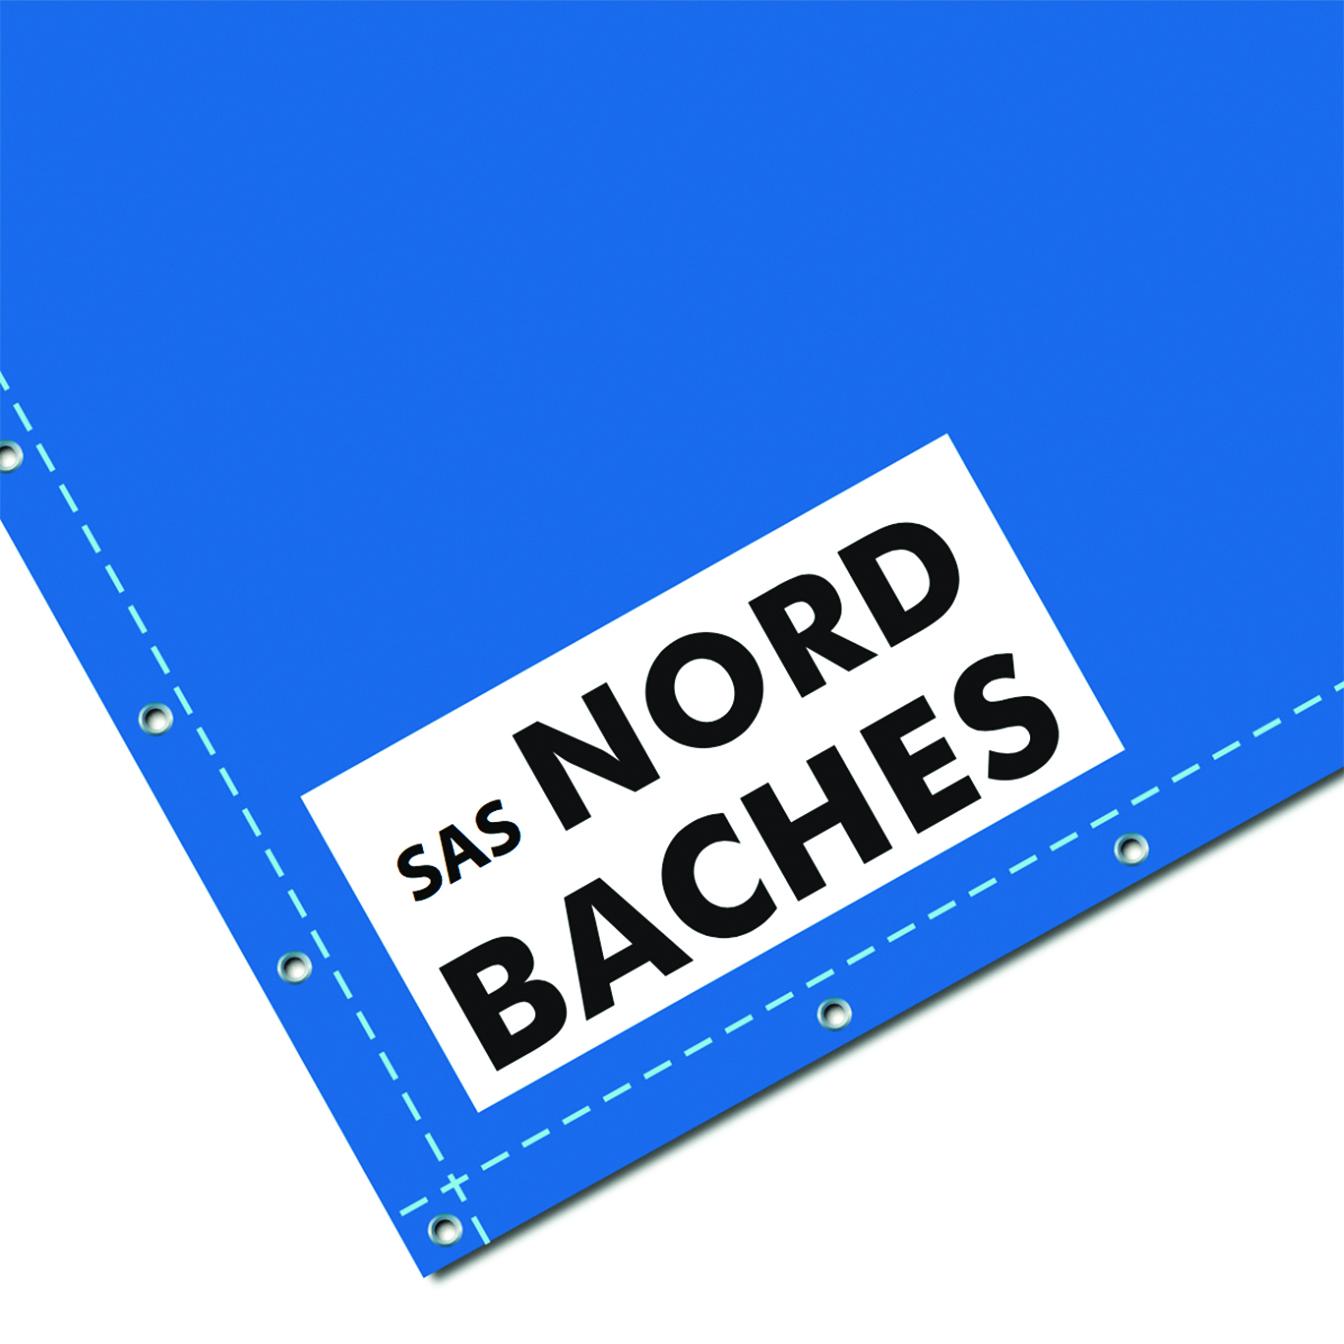 Nord baches